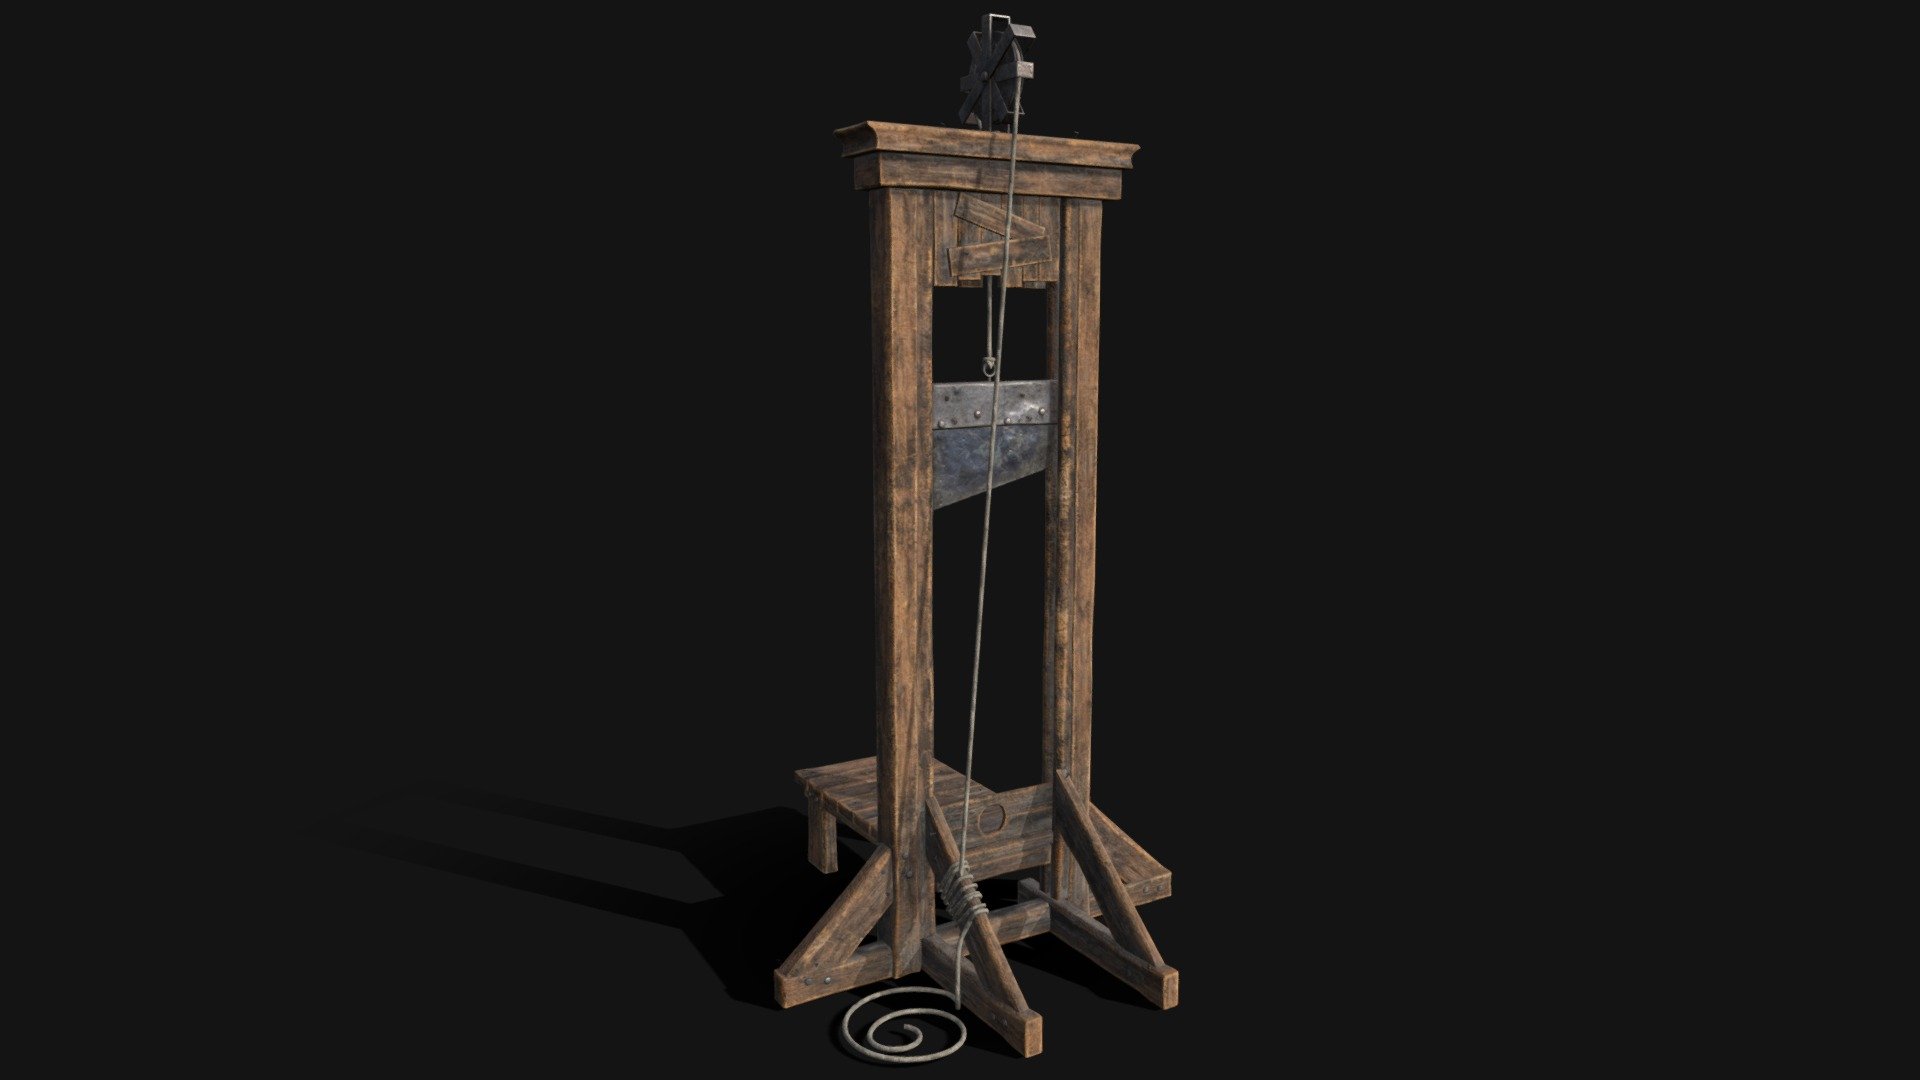 Medieval Guillotine 3D Model. This model contains the Medieval Guillotine itself 

All modeled in Maya, textured with Substance Painter.

The model was built to scale and is UV unwrapped properly. UDIM pipeline. 2 Islands

⦁   38392 tris. 

⦁   Contains: .FBX .OBJ and .DAE

⦁   Model has clean topology. No Ngons.

⦁   Built to scale

⦁   Unwrapped UV Map

⦁   4K Texture set

⦁   High quality details

⦁   Based on real life references

⦁   Renders done in Marmoset Toolbag

Polycount: 

Verts 19984

Edges 19537

Faces 19709

Tris 38392 

If you have any questions please feel free to ask me 3d model